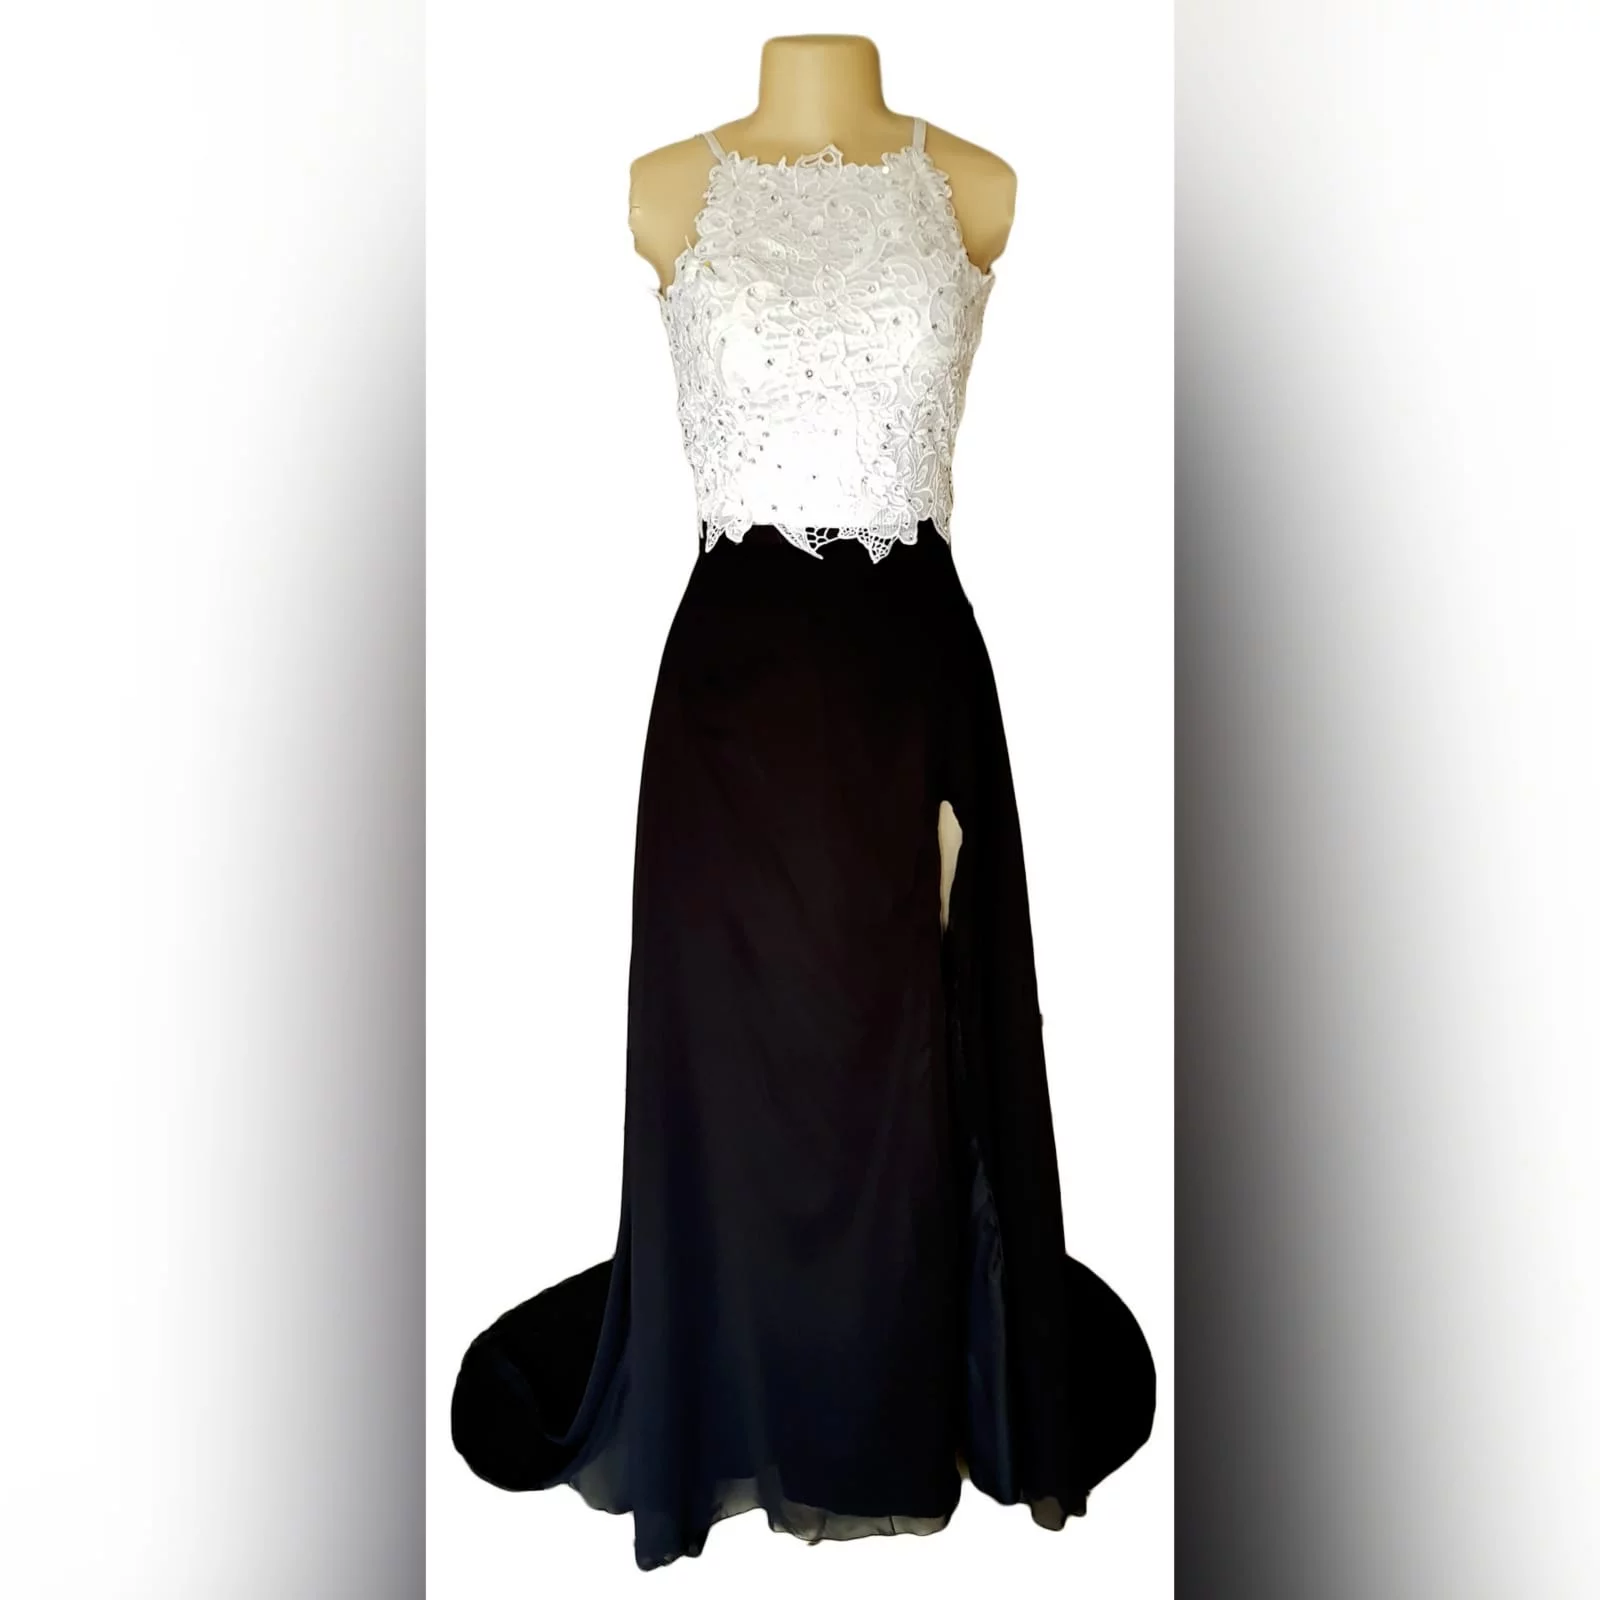 2 piece black and white prom dress 2 2 piece black and white prom dress, flowy black skirt with a high slit and a train. White lace beaded top.